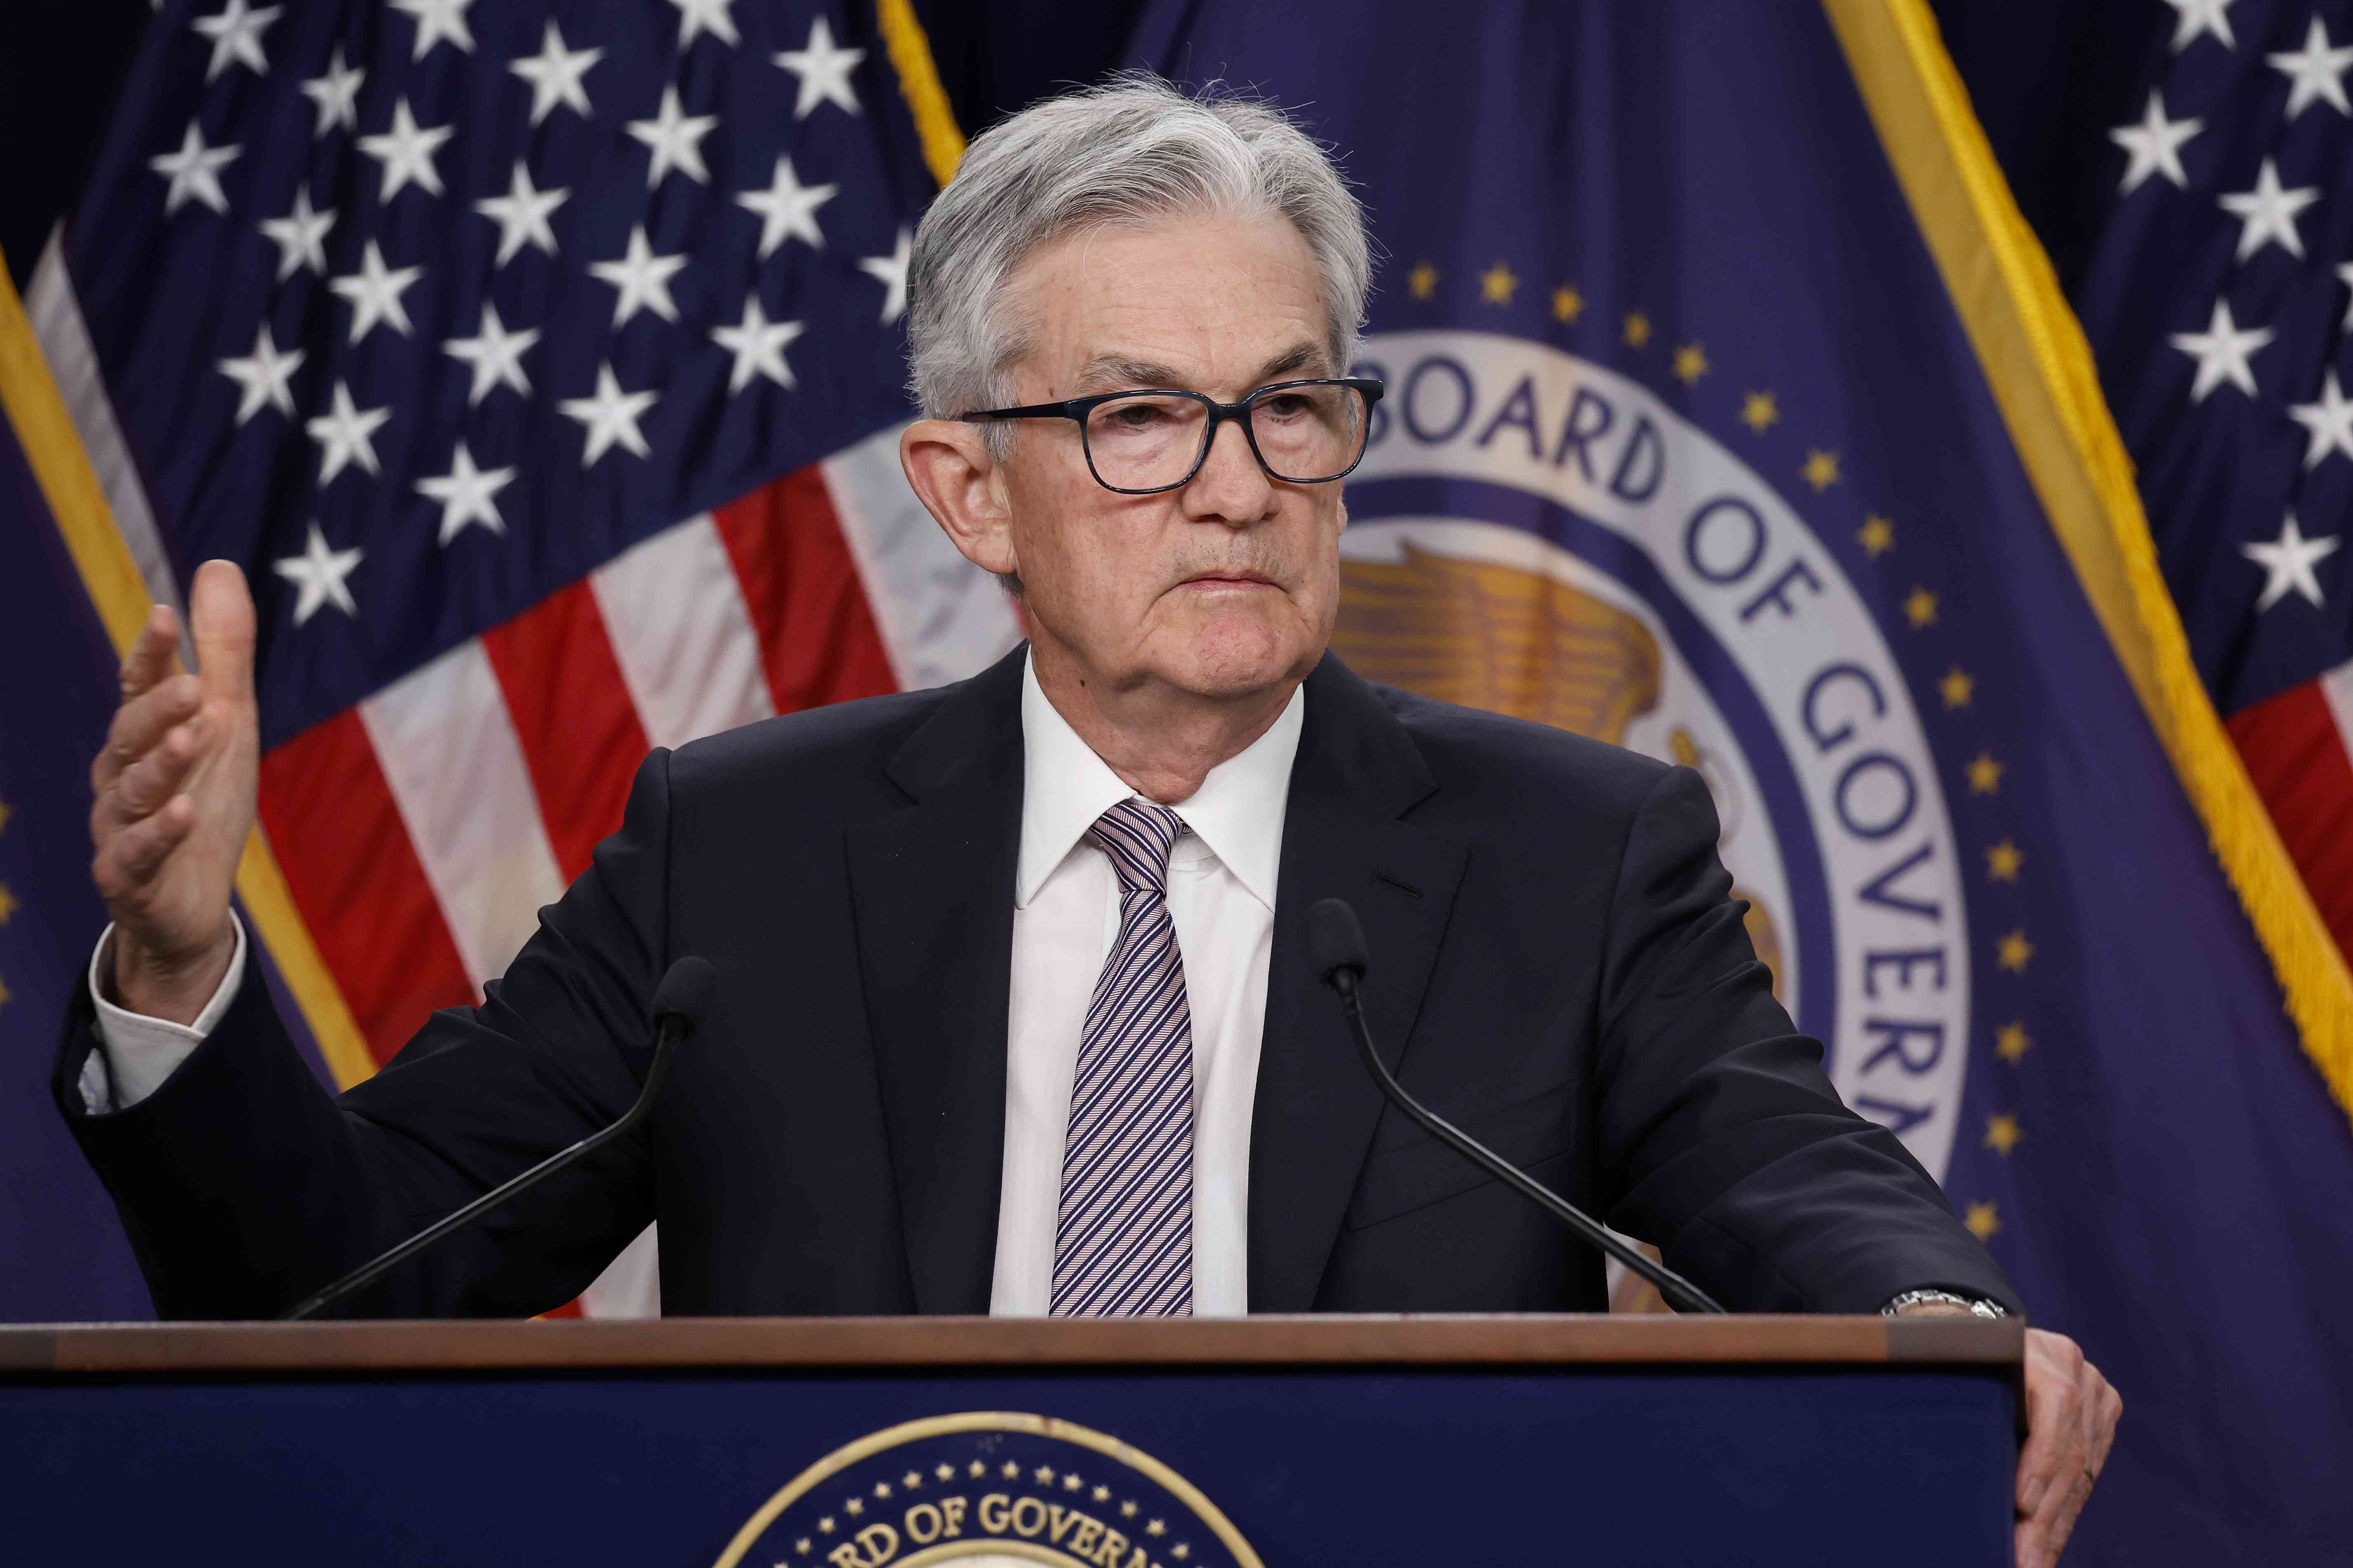 Federal Reserve Board Chairman Jerome Powell delivers remarks at a news conference following a Federal Open Market Committee meeting on May 3, 2023 in Washington, DC. The Federal Reserve announced a 0.25 percentage point interest rate increase bringing the key federal funds rate to more than 5%, a 16-year high.